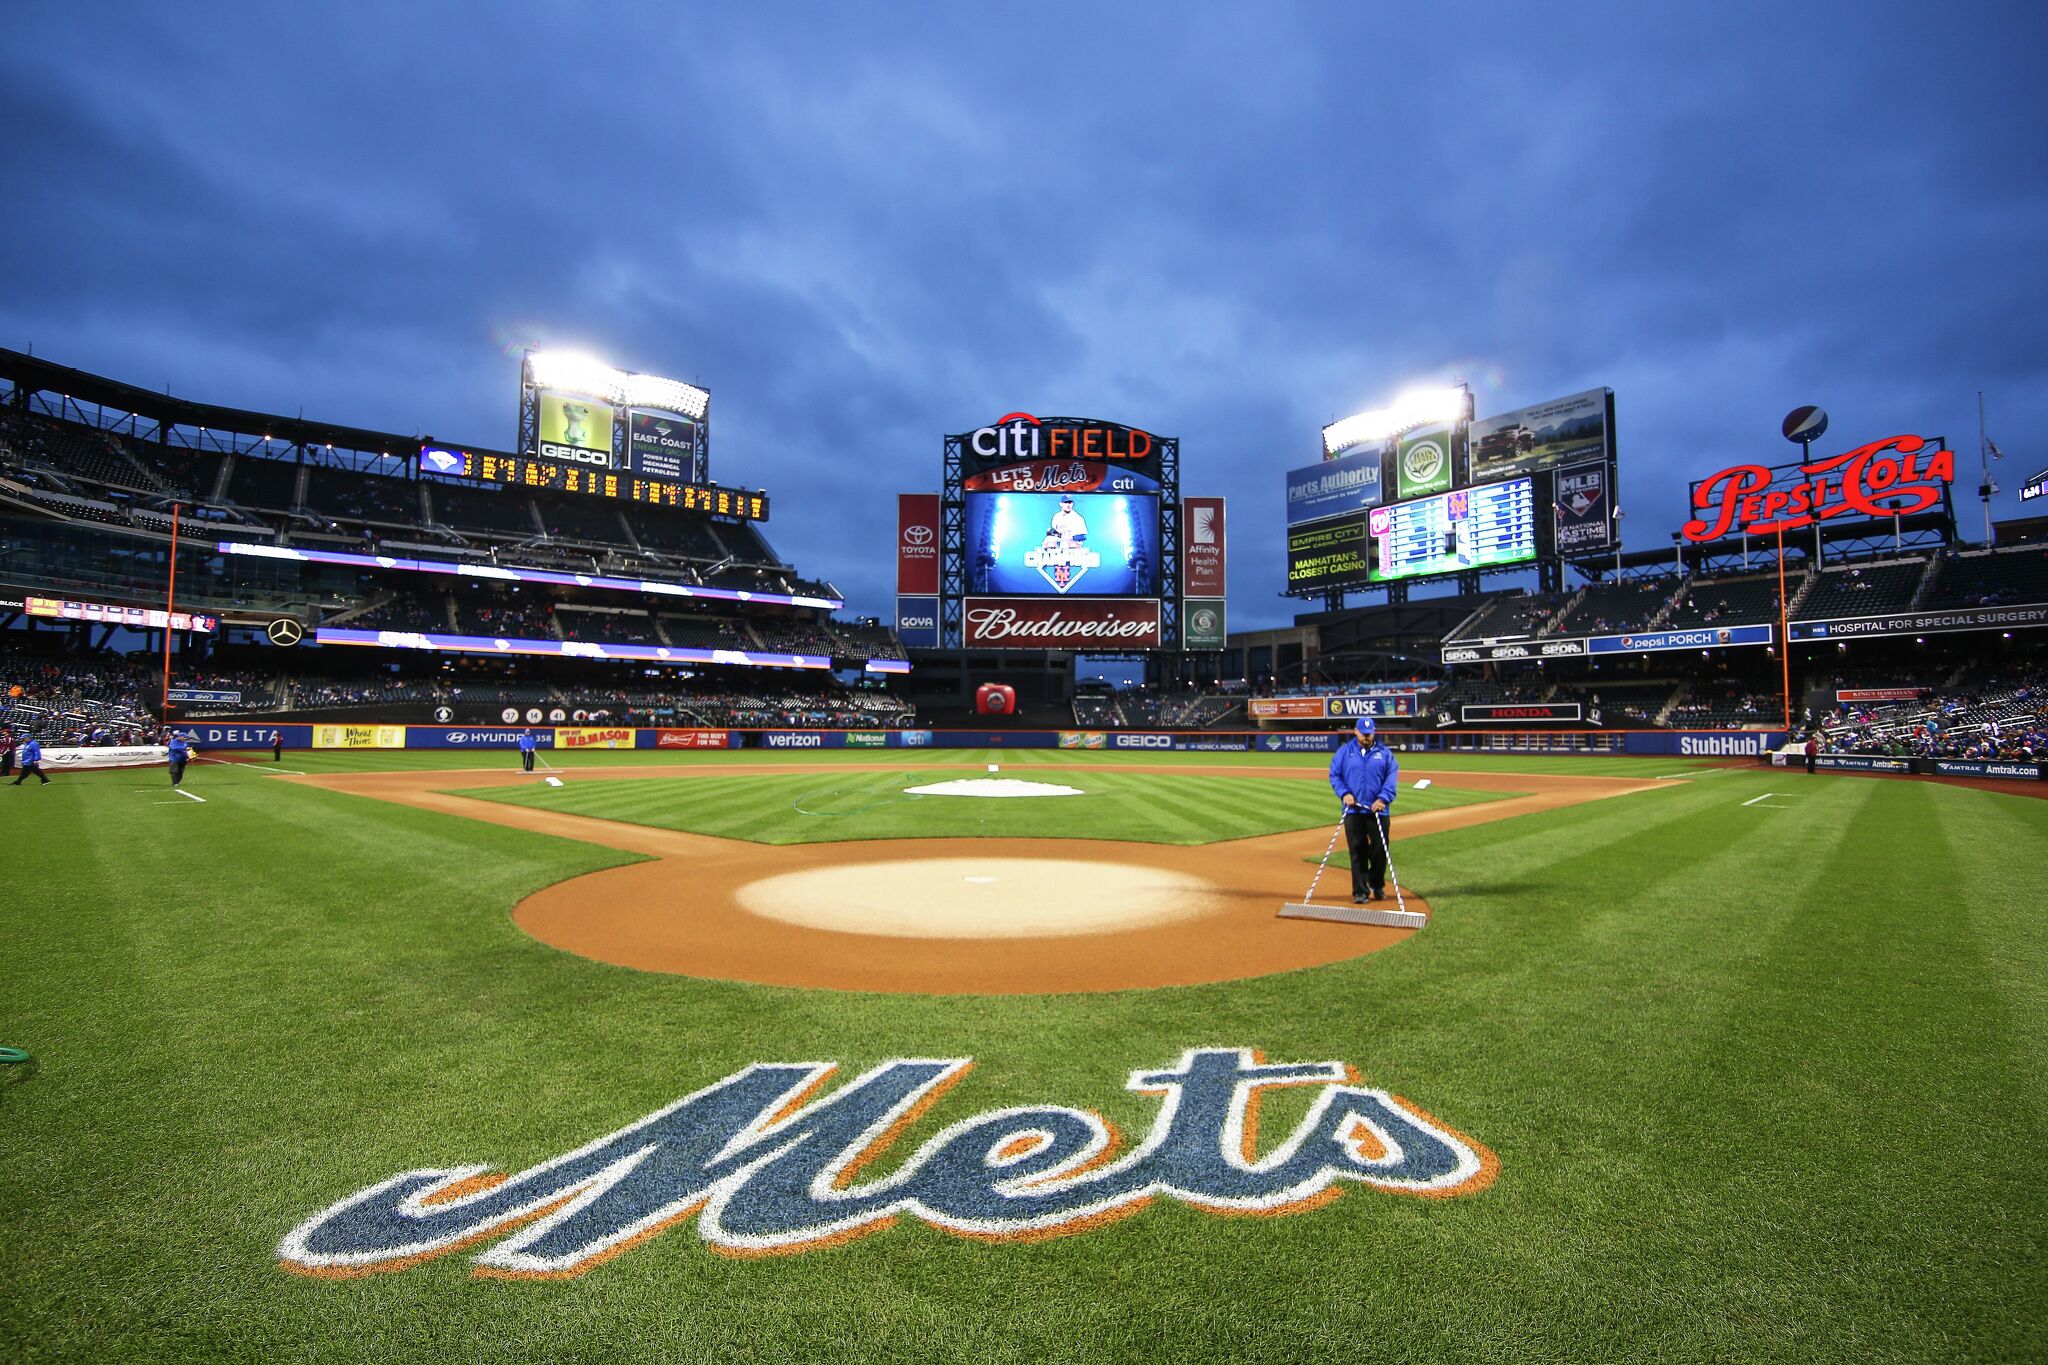 June 15 Should Be A Holiday For Mets Fans, by New York Mets